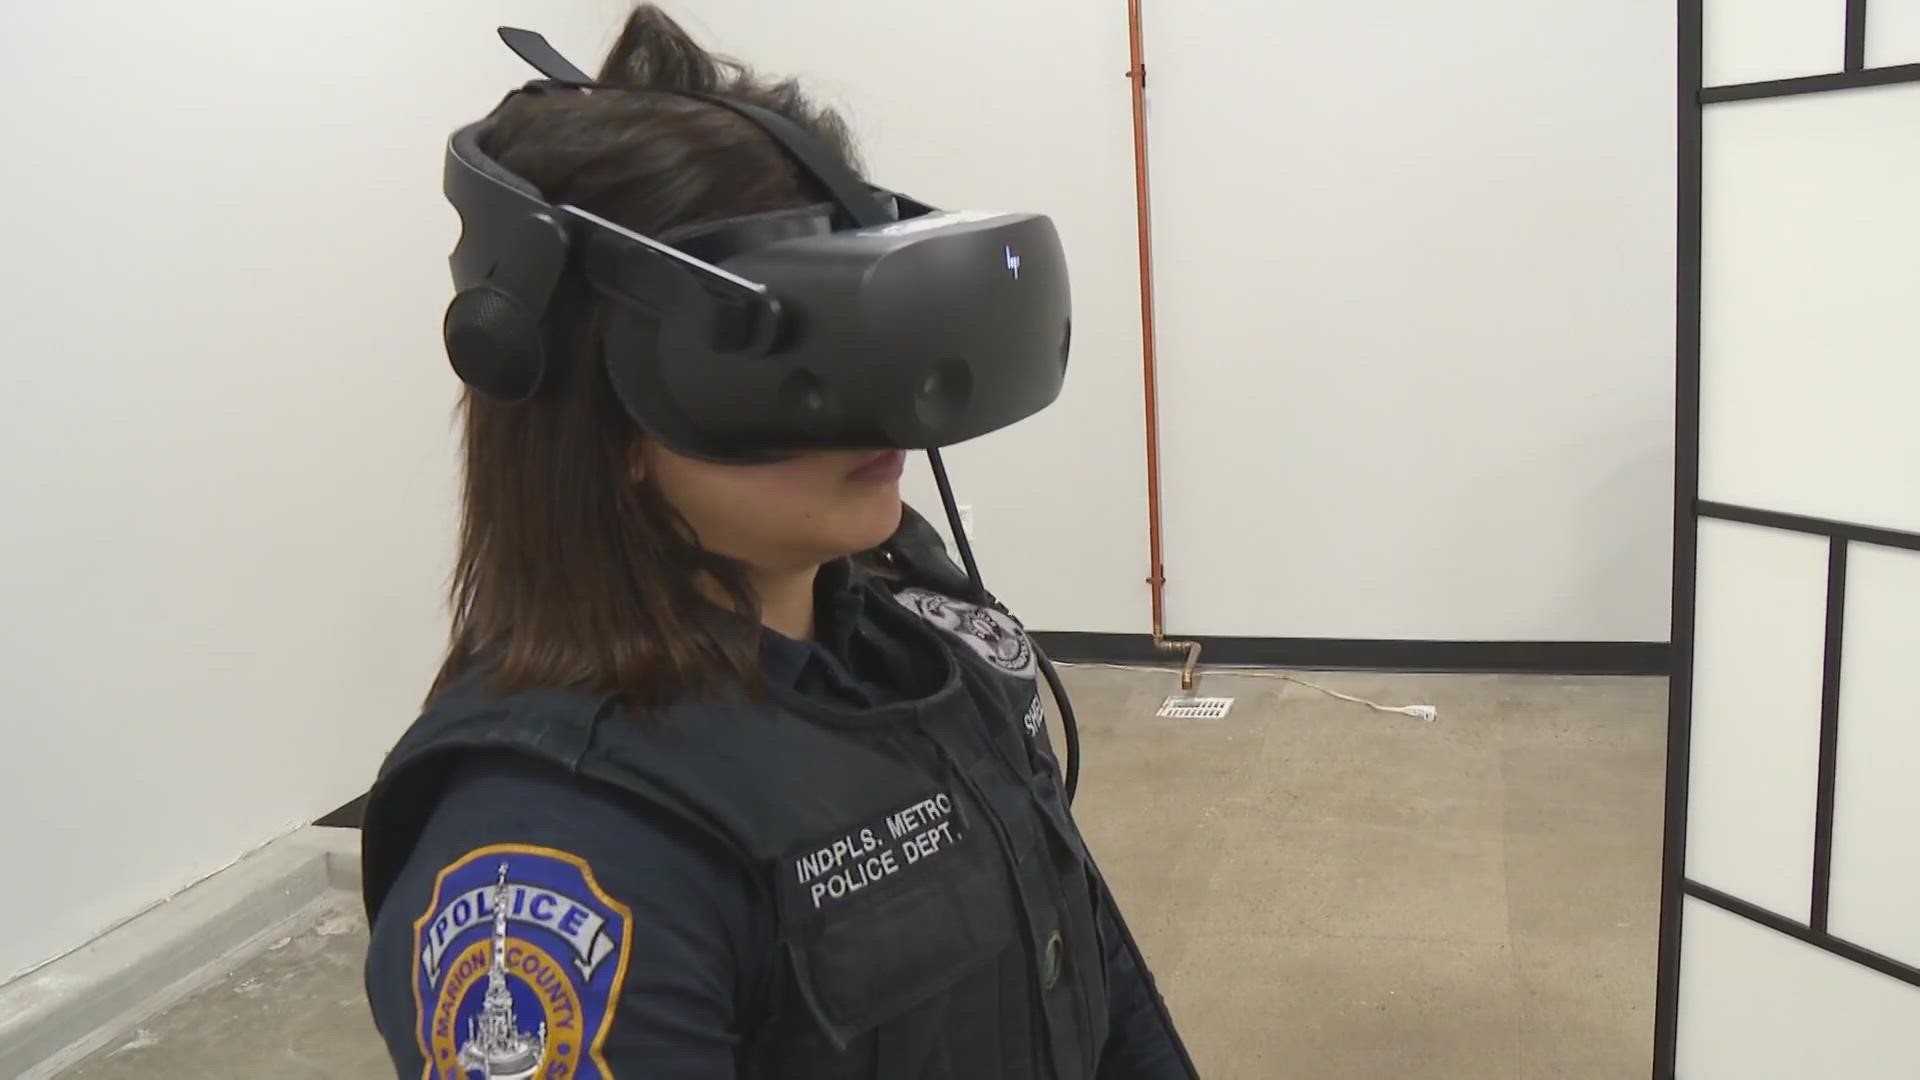 An Indy-based tech company is using "virtual reality" to keep police emotionally healthy.